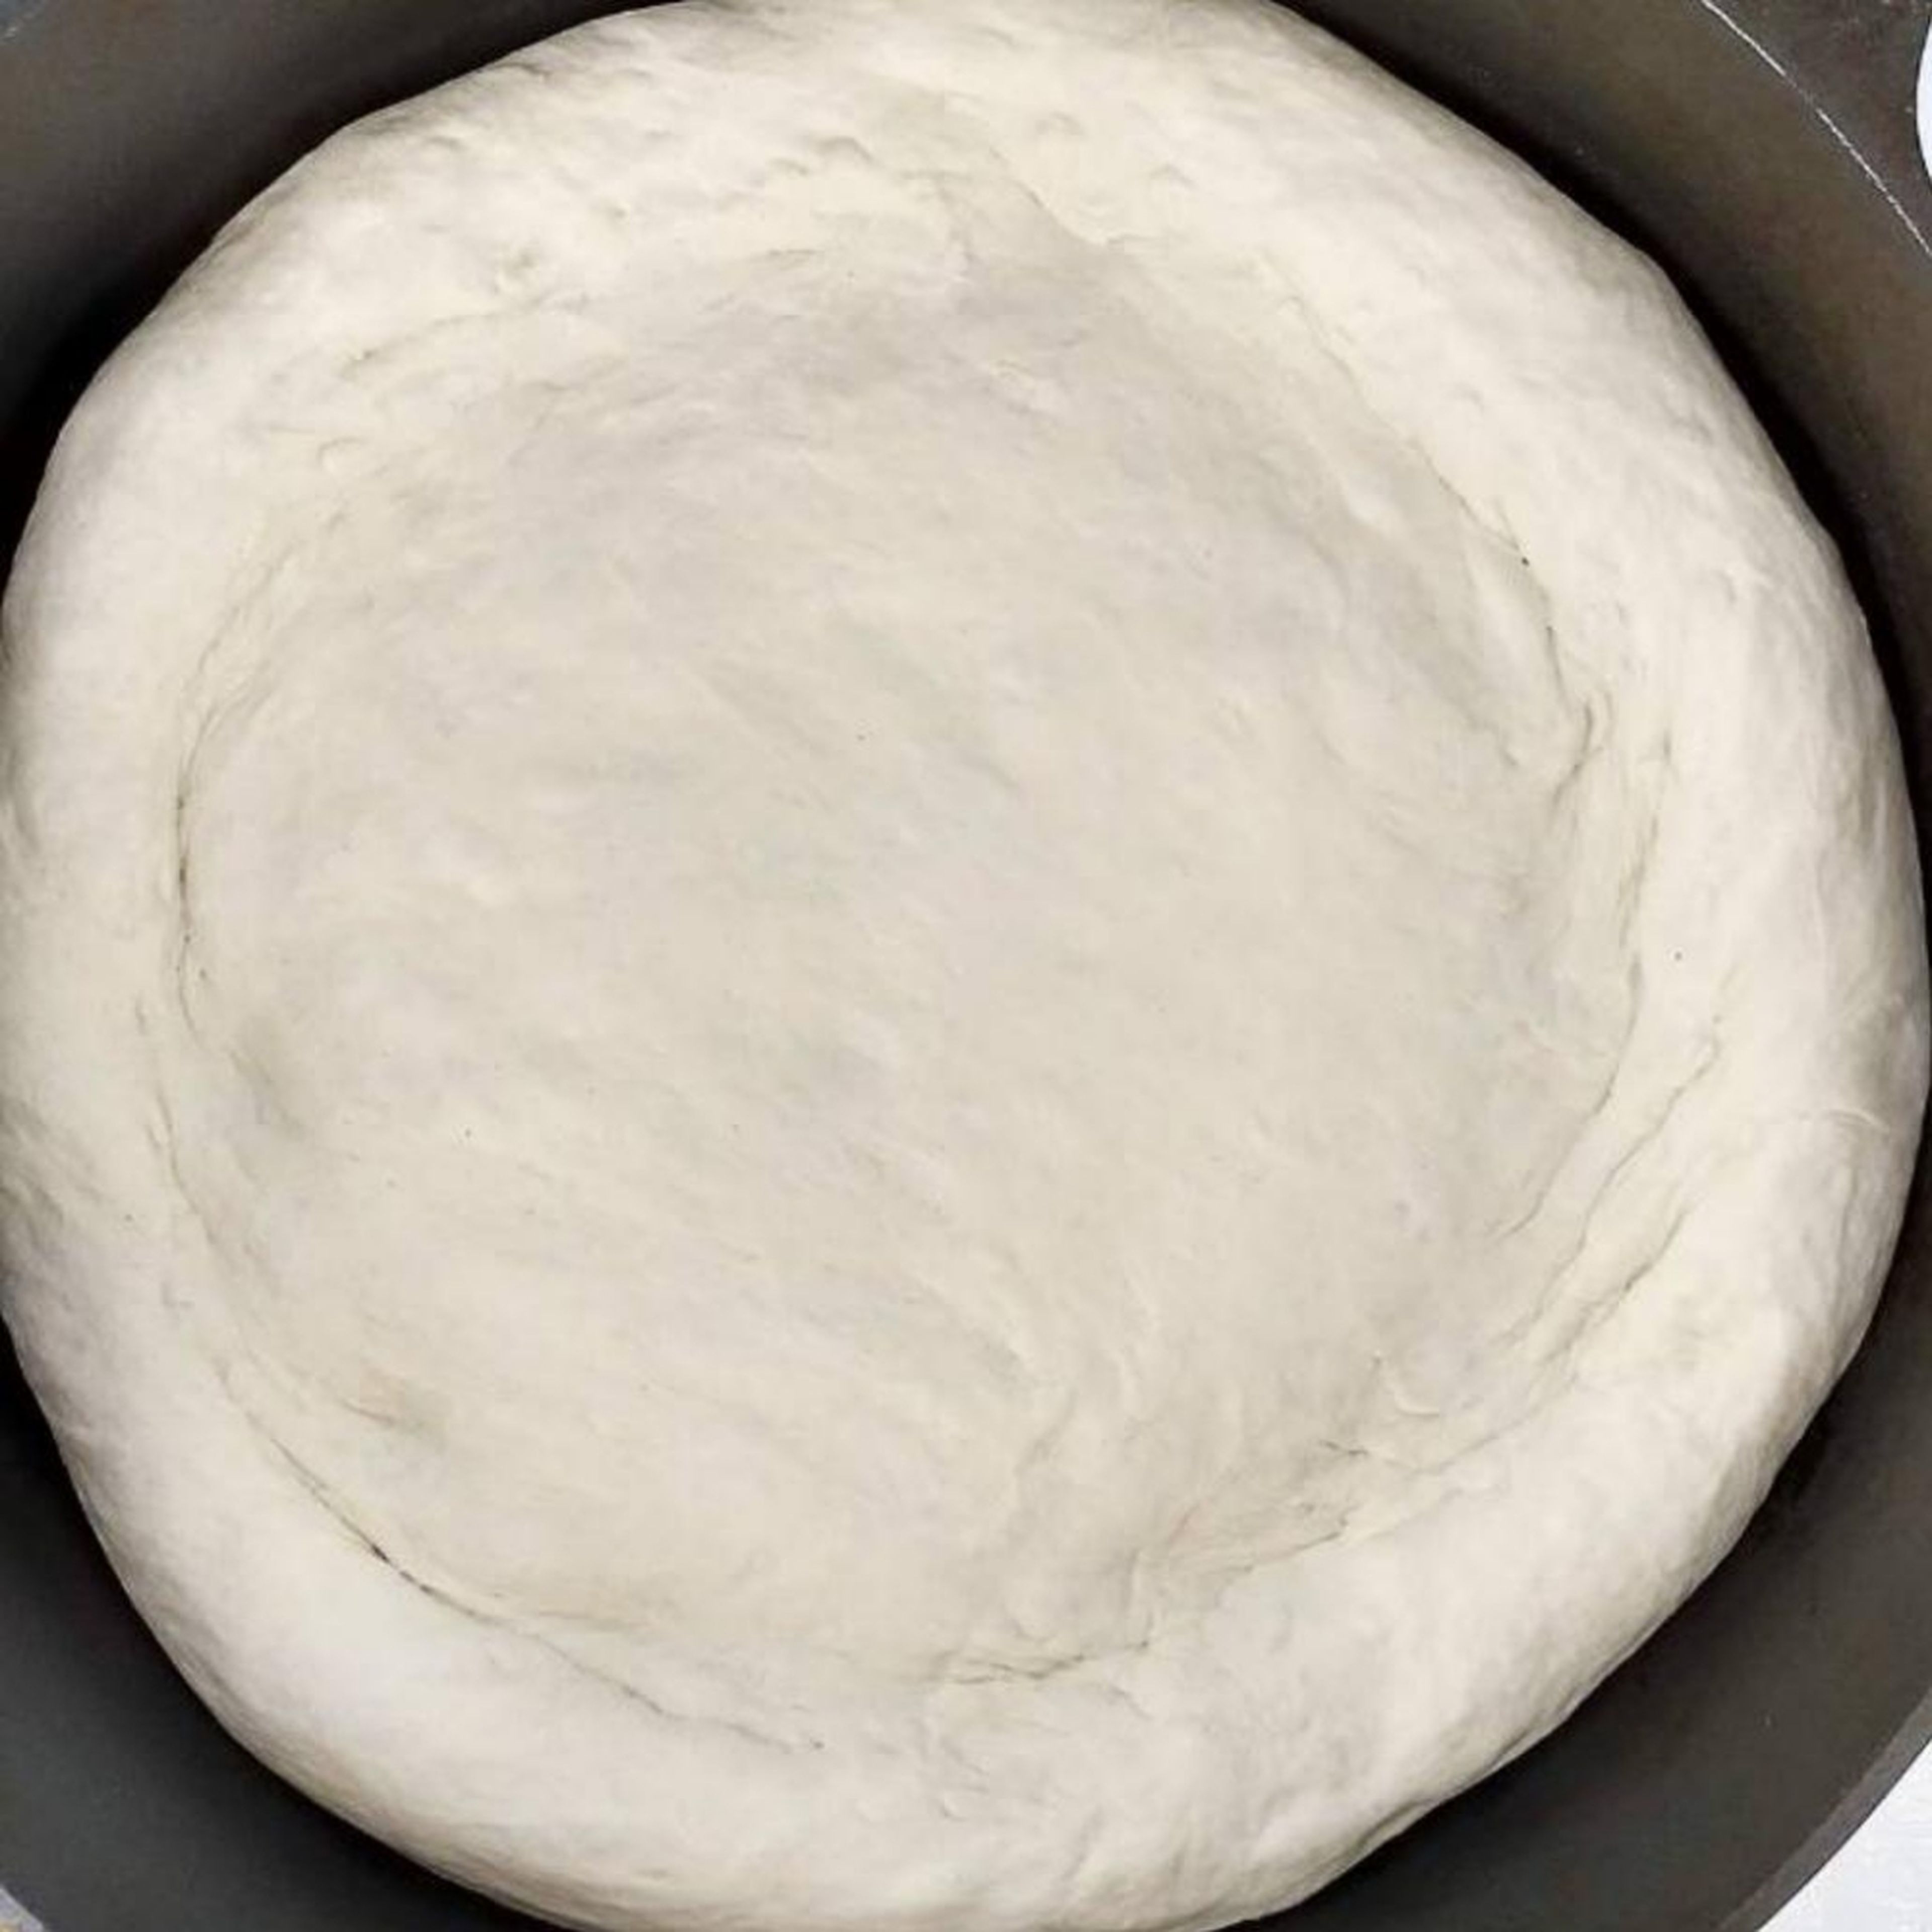 After an hour, put the dough on the table and create pats from it. Start heating the pan and put some olive oil in it. Put the dough pat in the pan and fit the dough to the size of the pan. Put the cover onthe pan and fry the dough on the small heat for 5min.